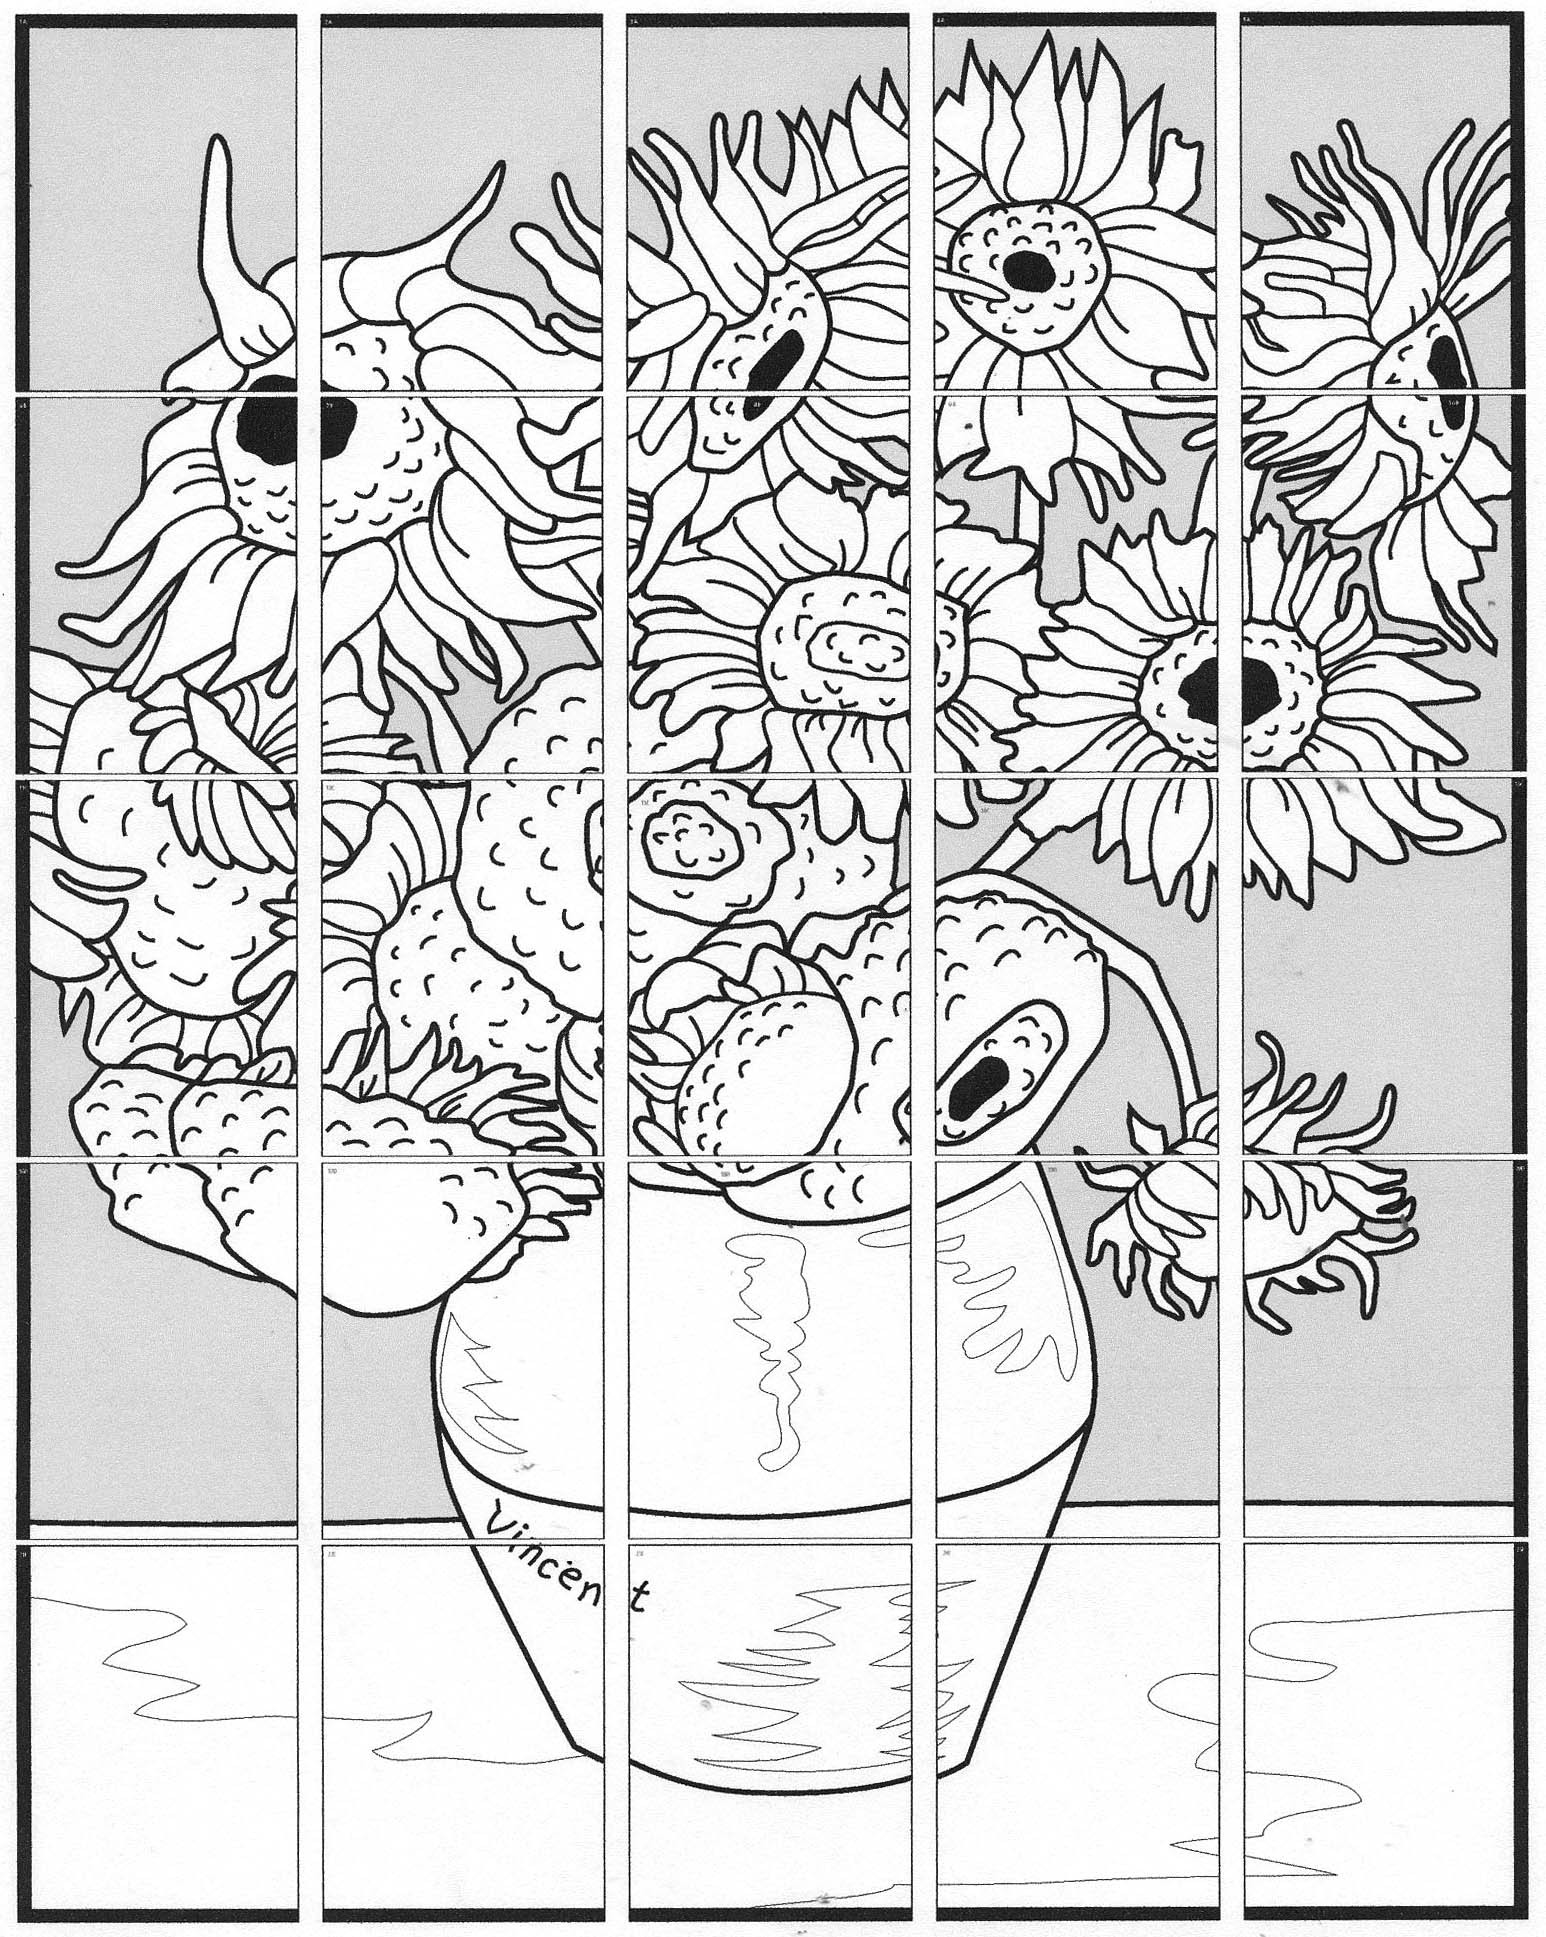 Van Gogh Coloring Pages
 Van Gogh’s Sunflower Mural Art Projects for Kids